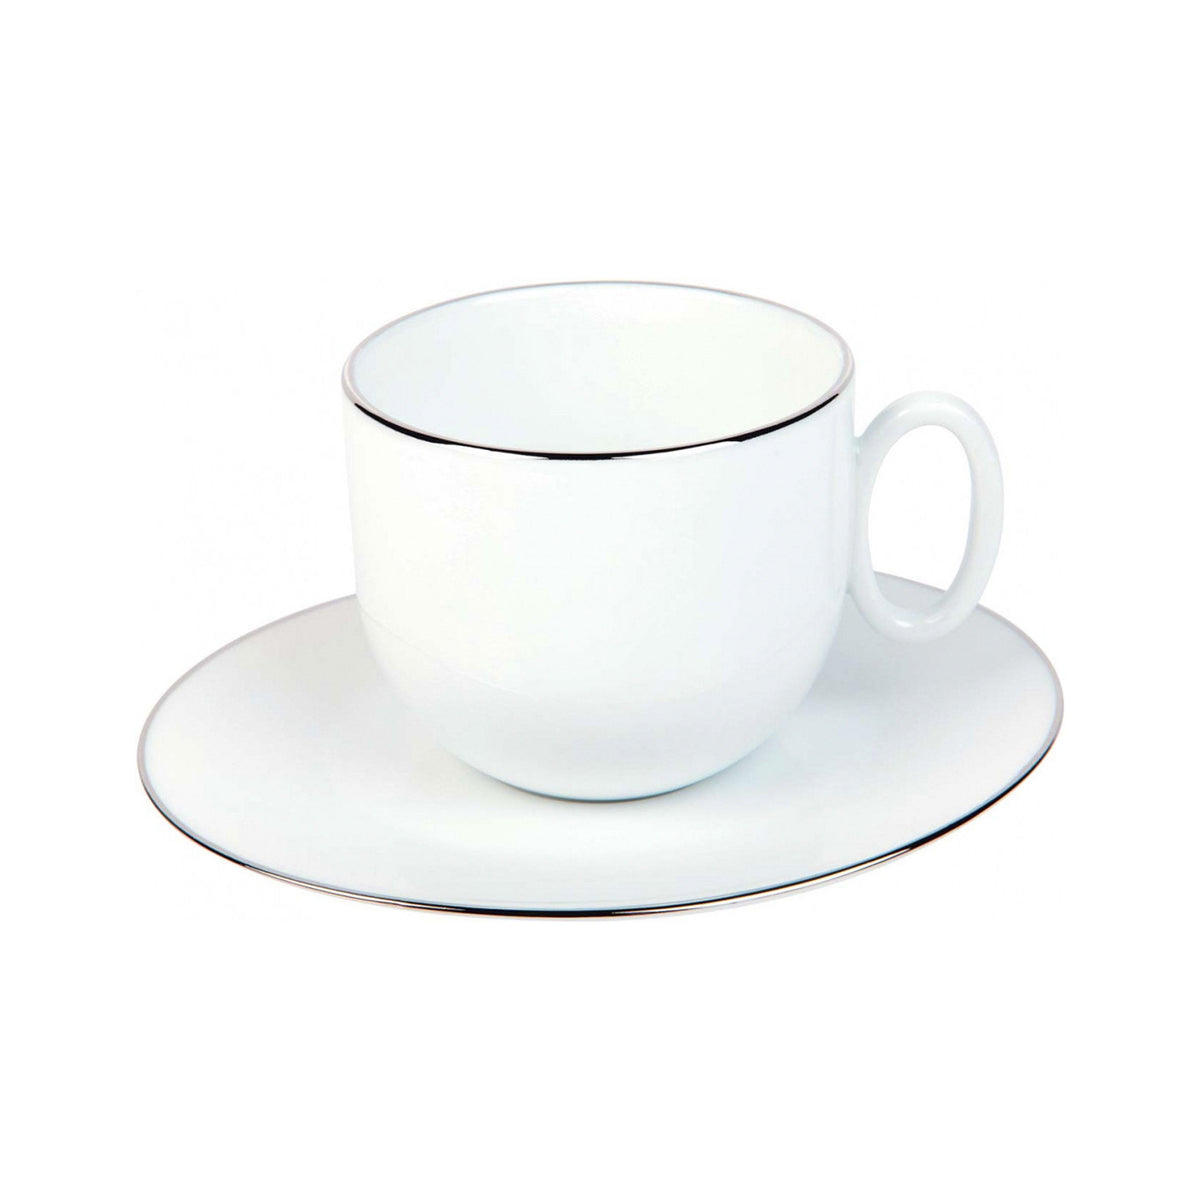 Epure Platinum Breakfast Cup and Saucer